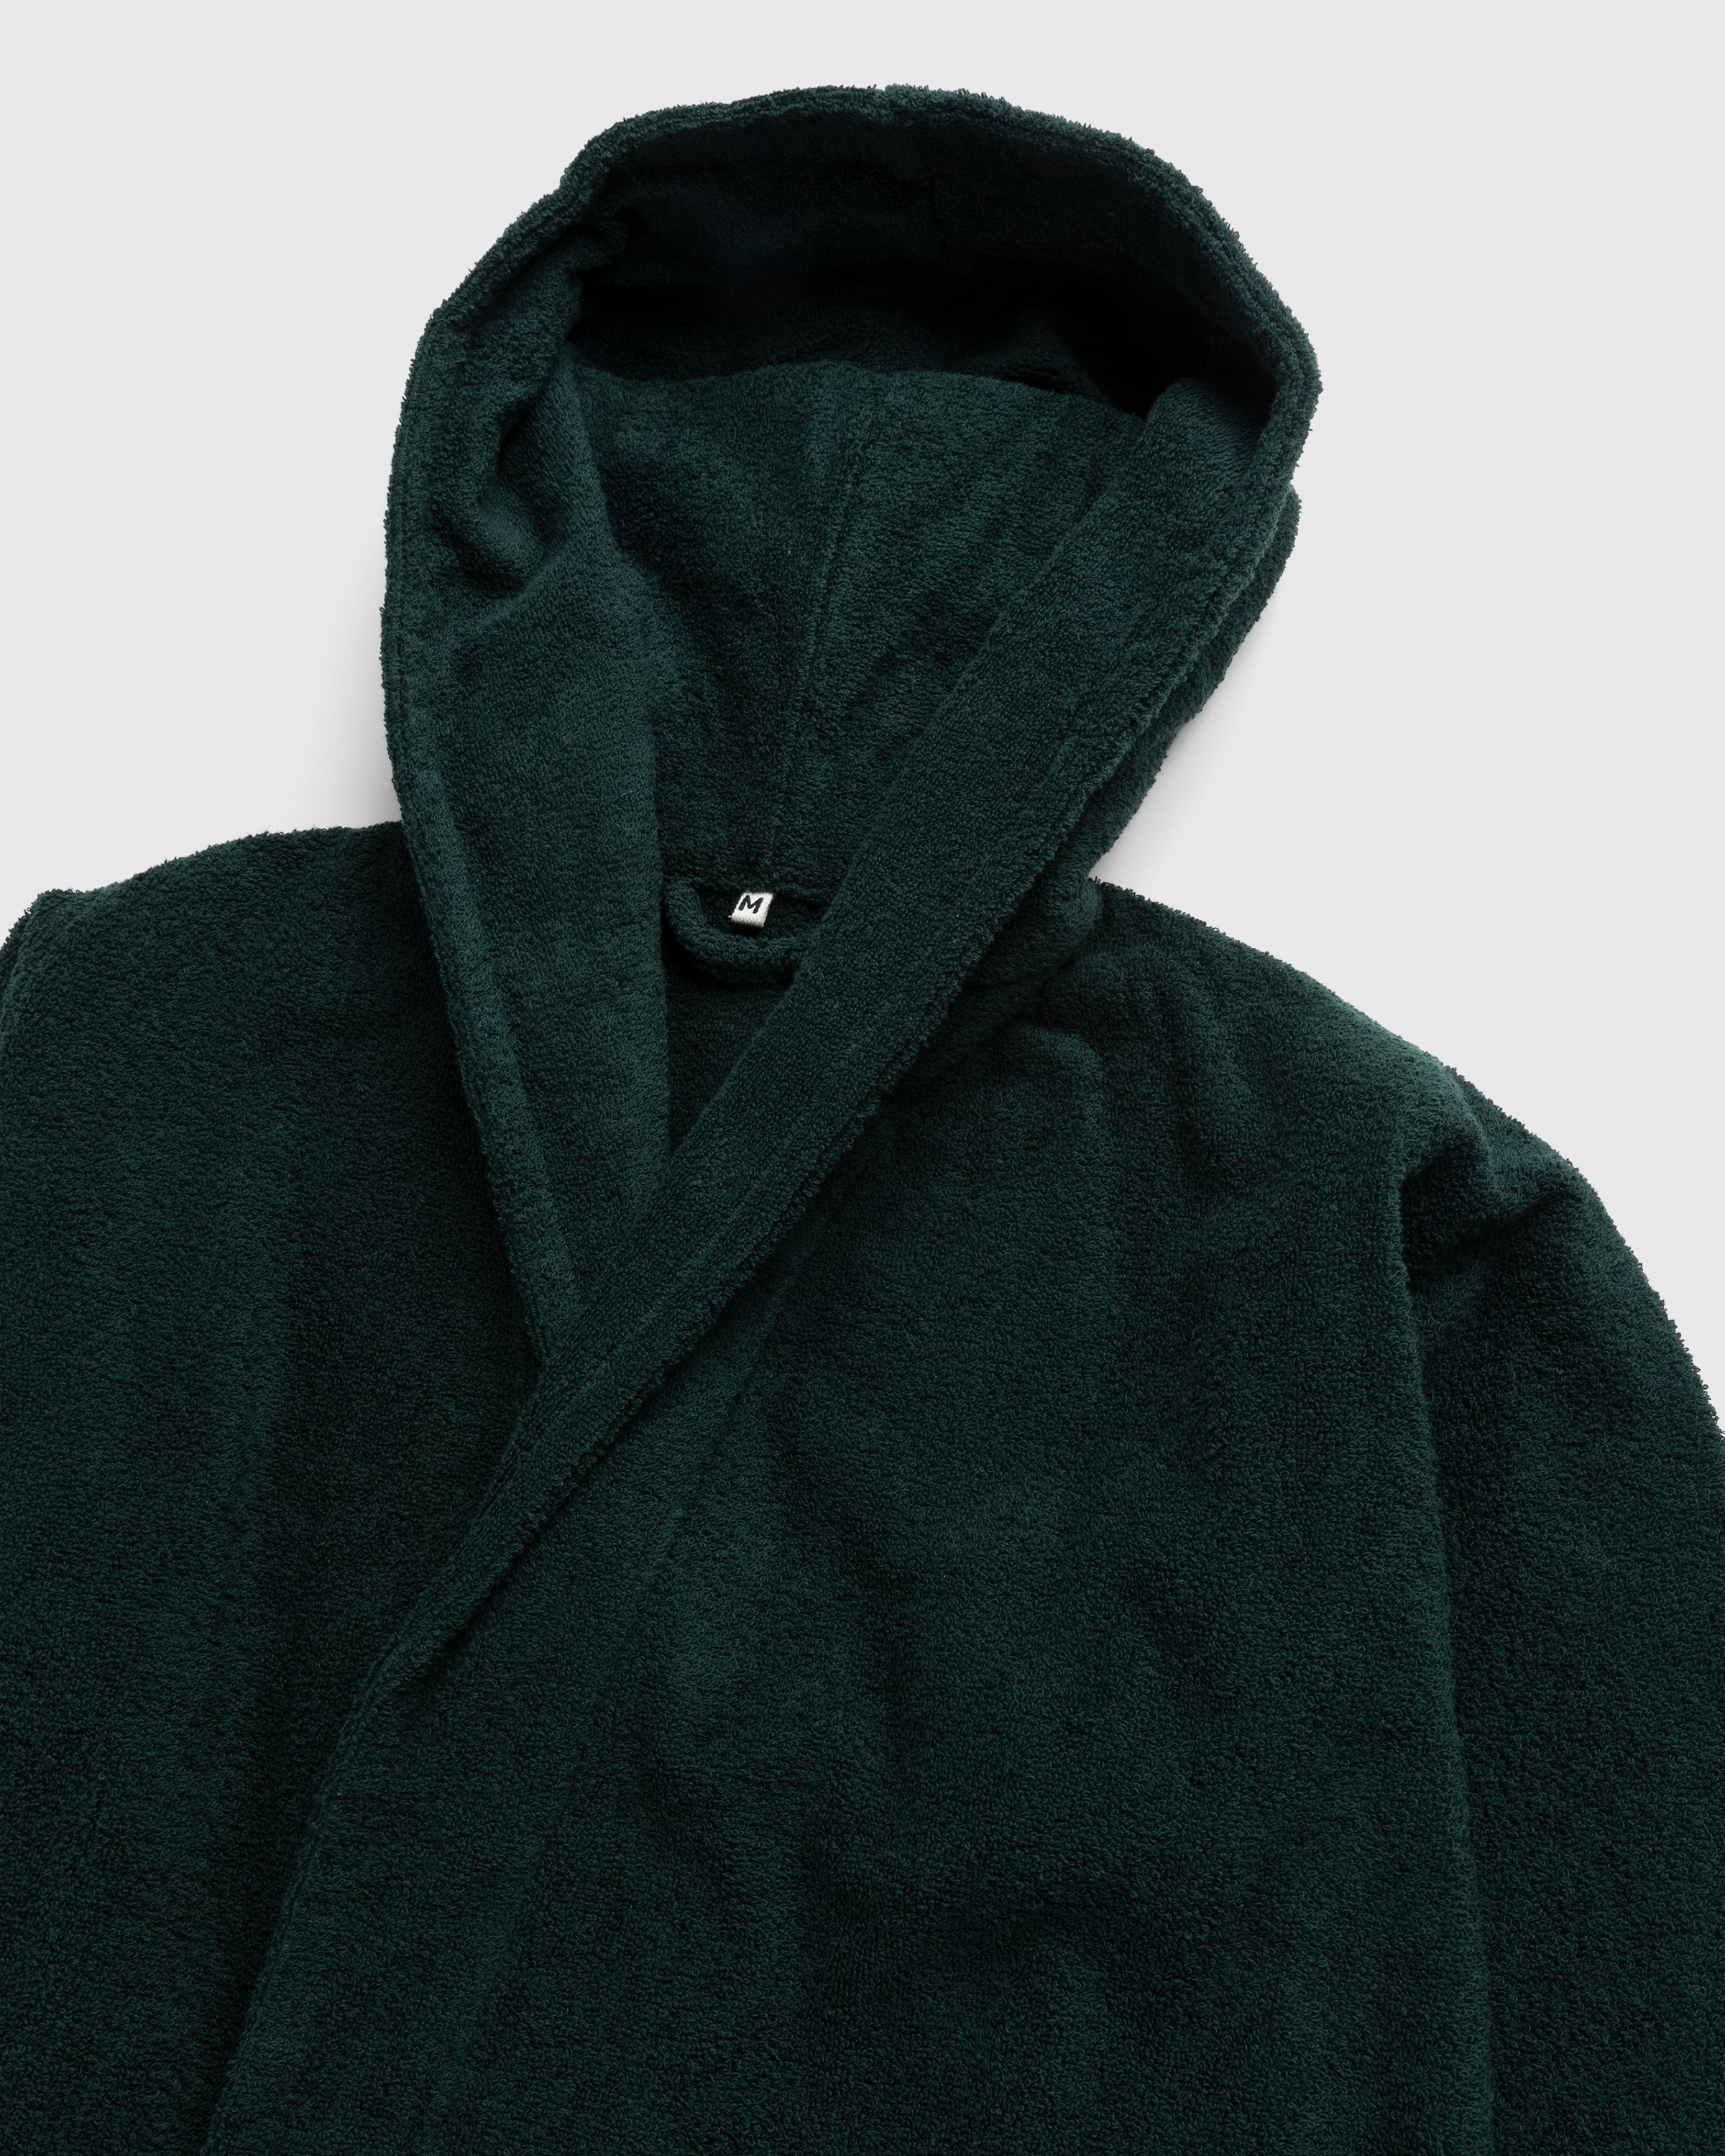 Tekla - Hooded Bathrobe Solid Forest Green - Lifestyle - Green - Image 3